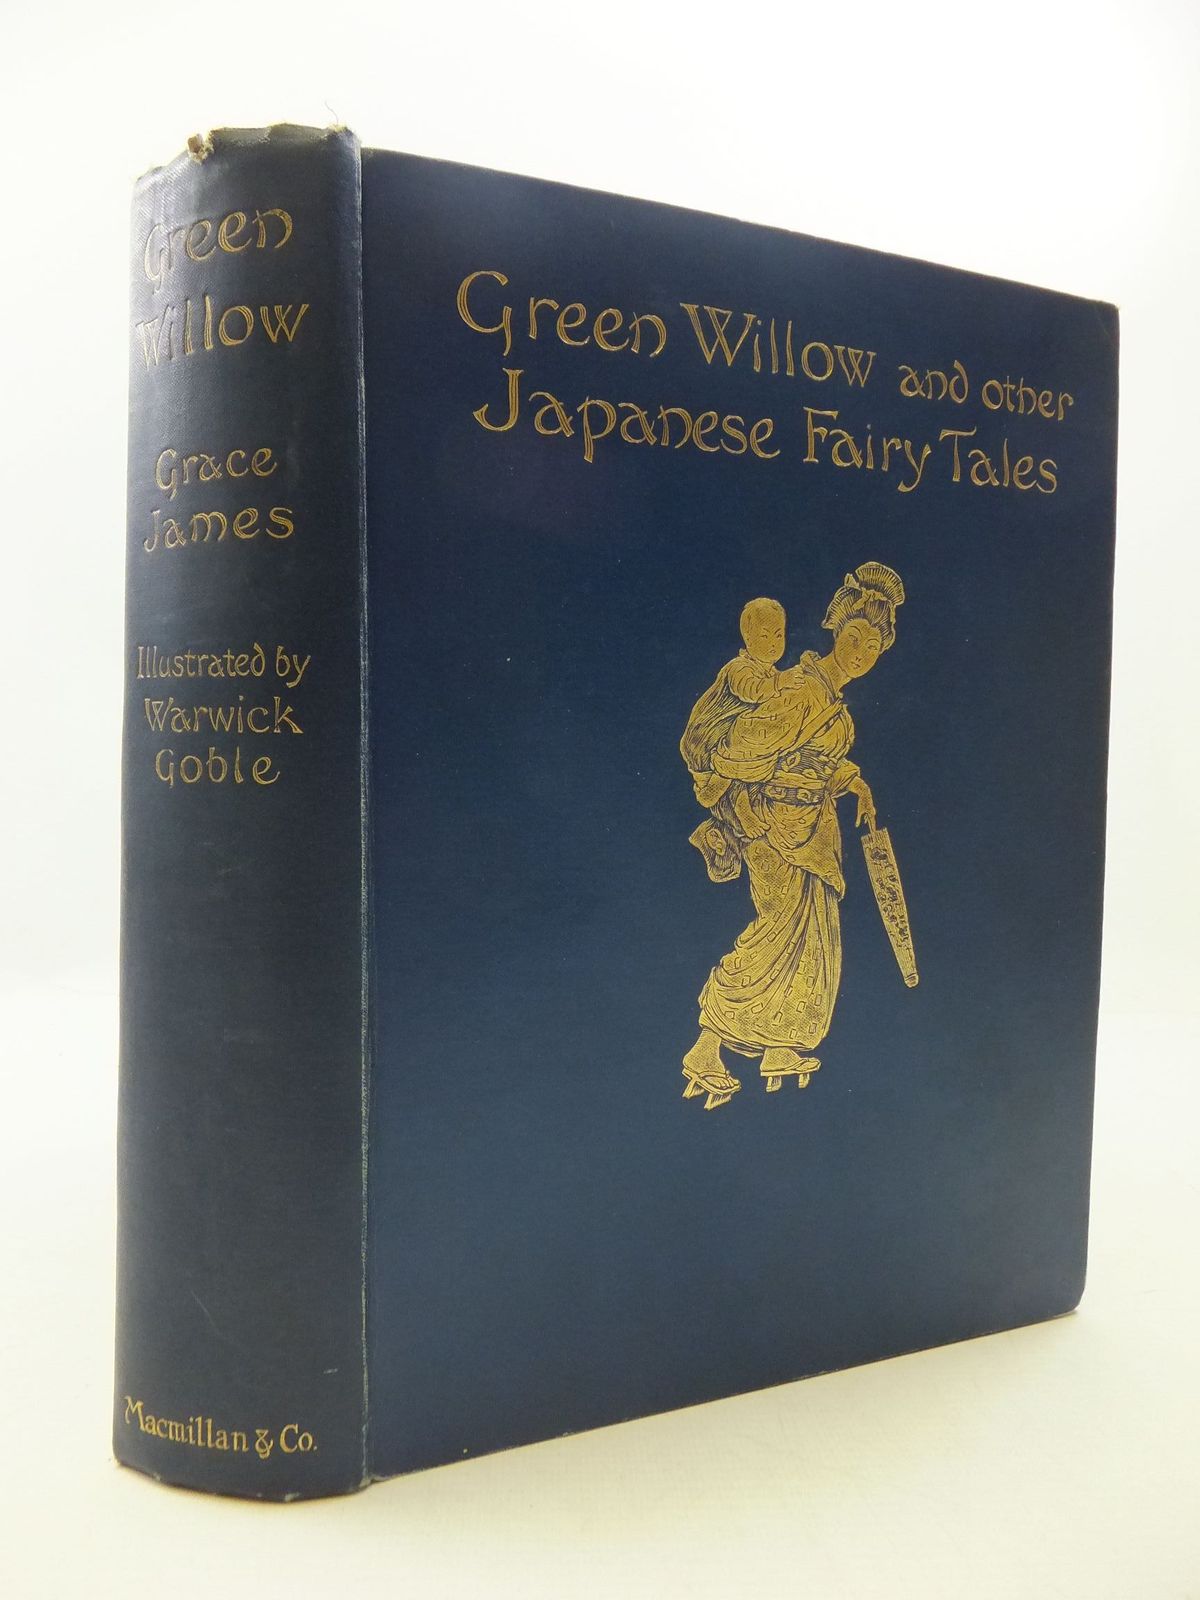 Cover of GREEN WILLOW AND OTHER JAPANESE FAIRY TALES by Grace James